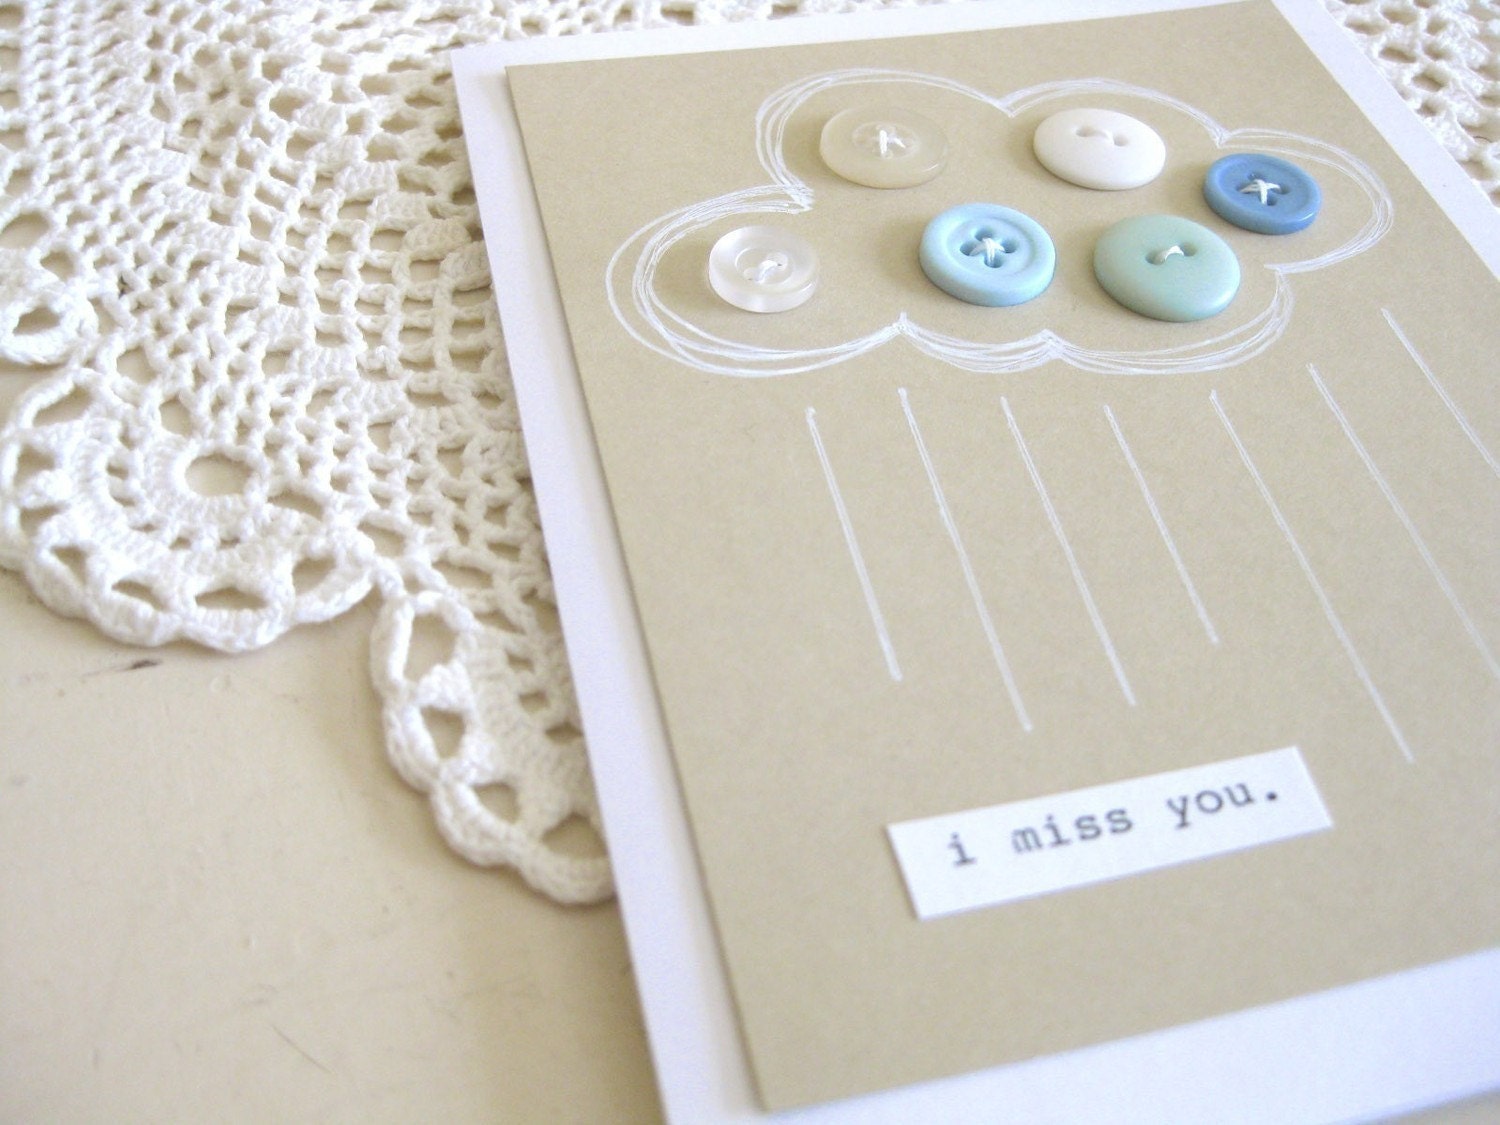 i miss you.  - button cloud greeting card